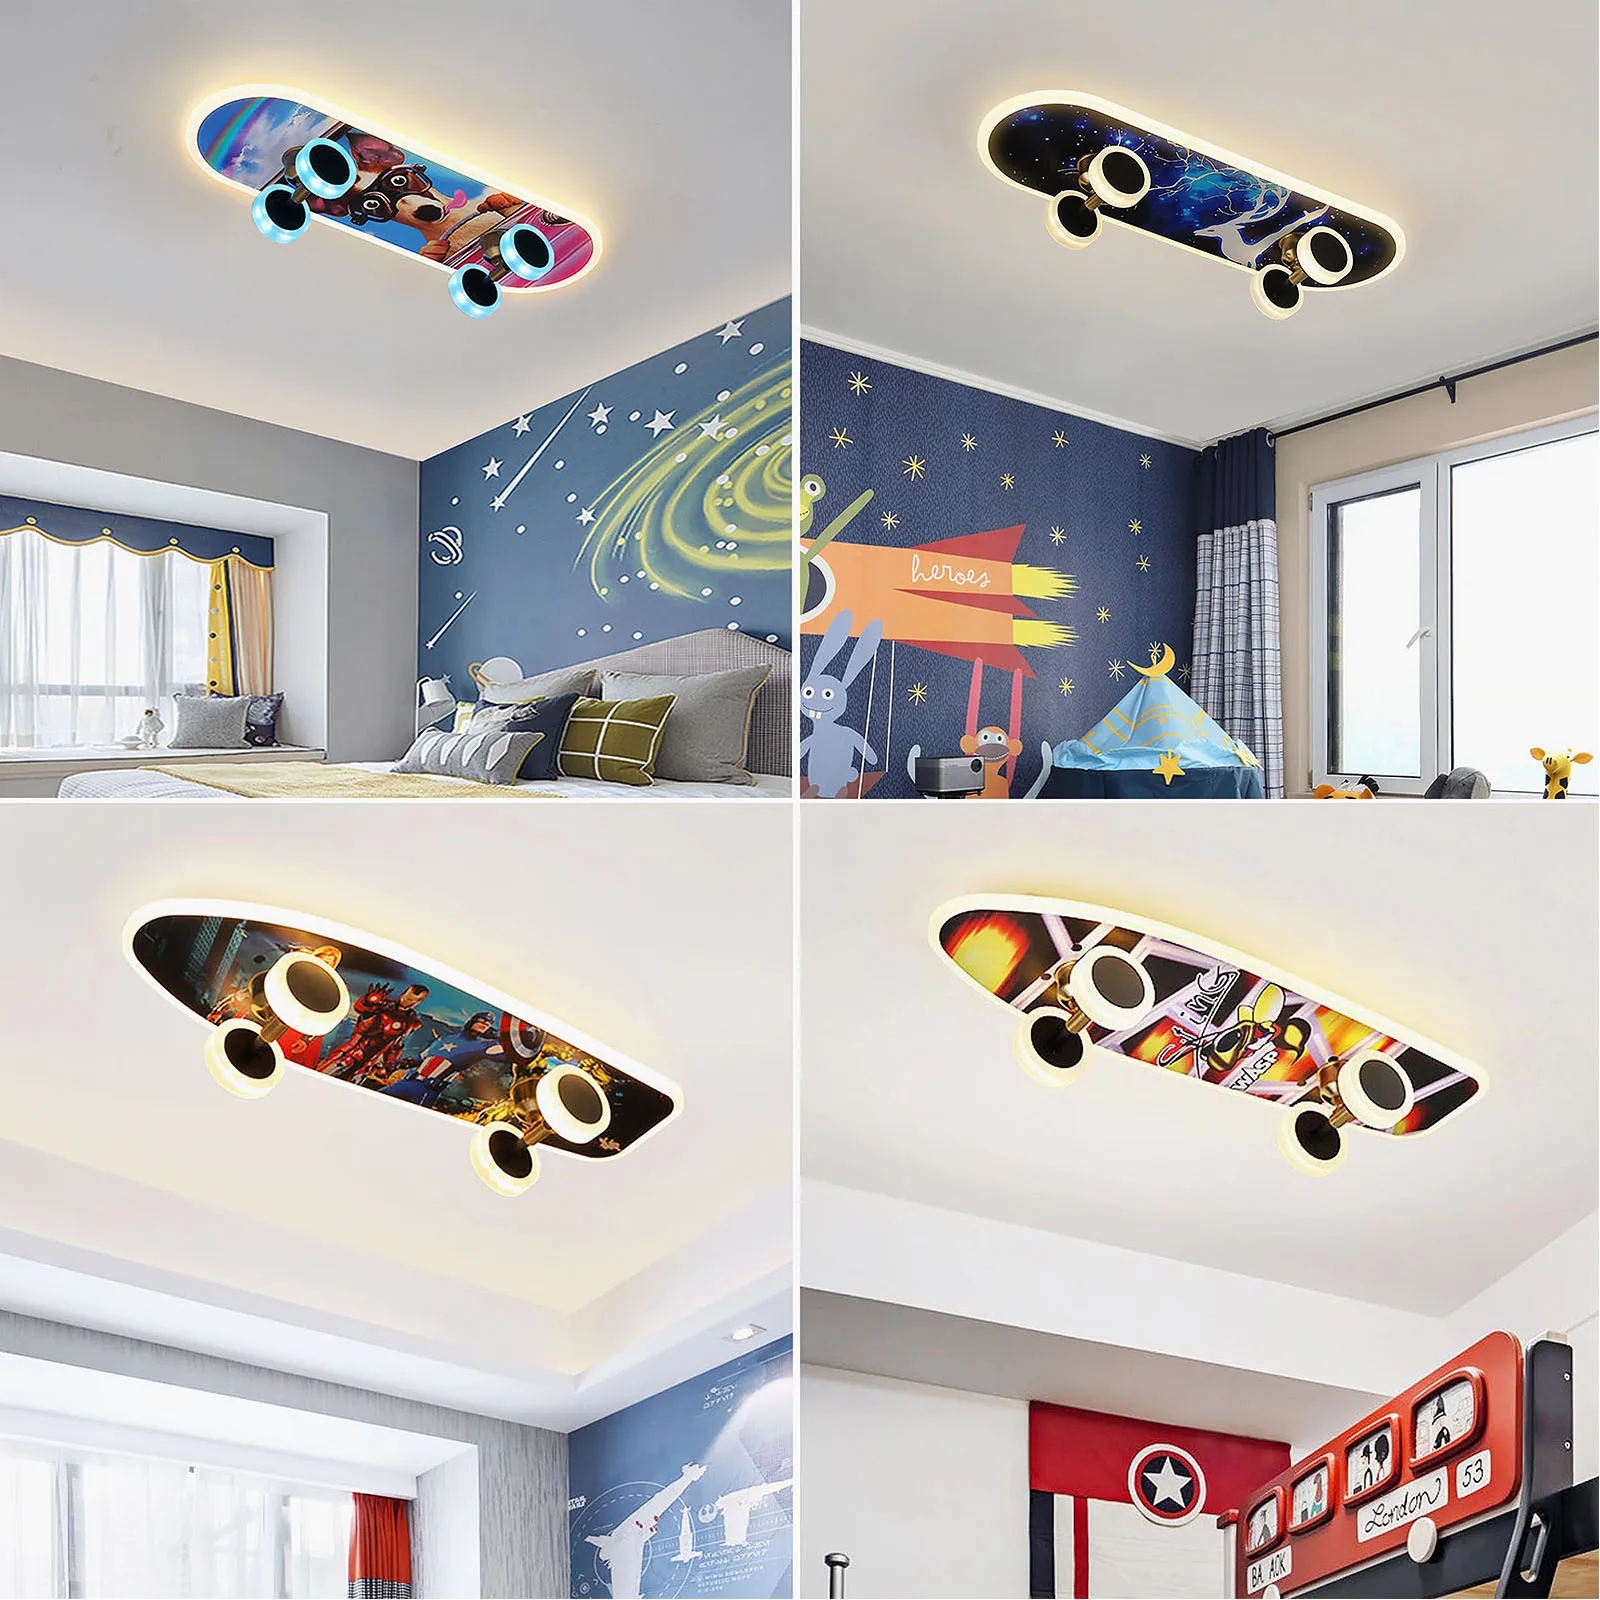 

Children Room Skateboard Ceiling Light Dimmable with Remote, Modern Ceiling Lamp, RGB Color Change for Boys Bedroom Decoration